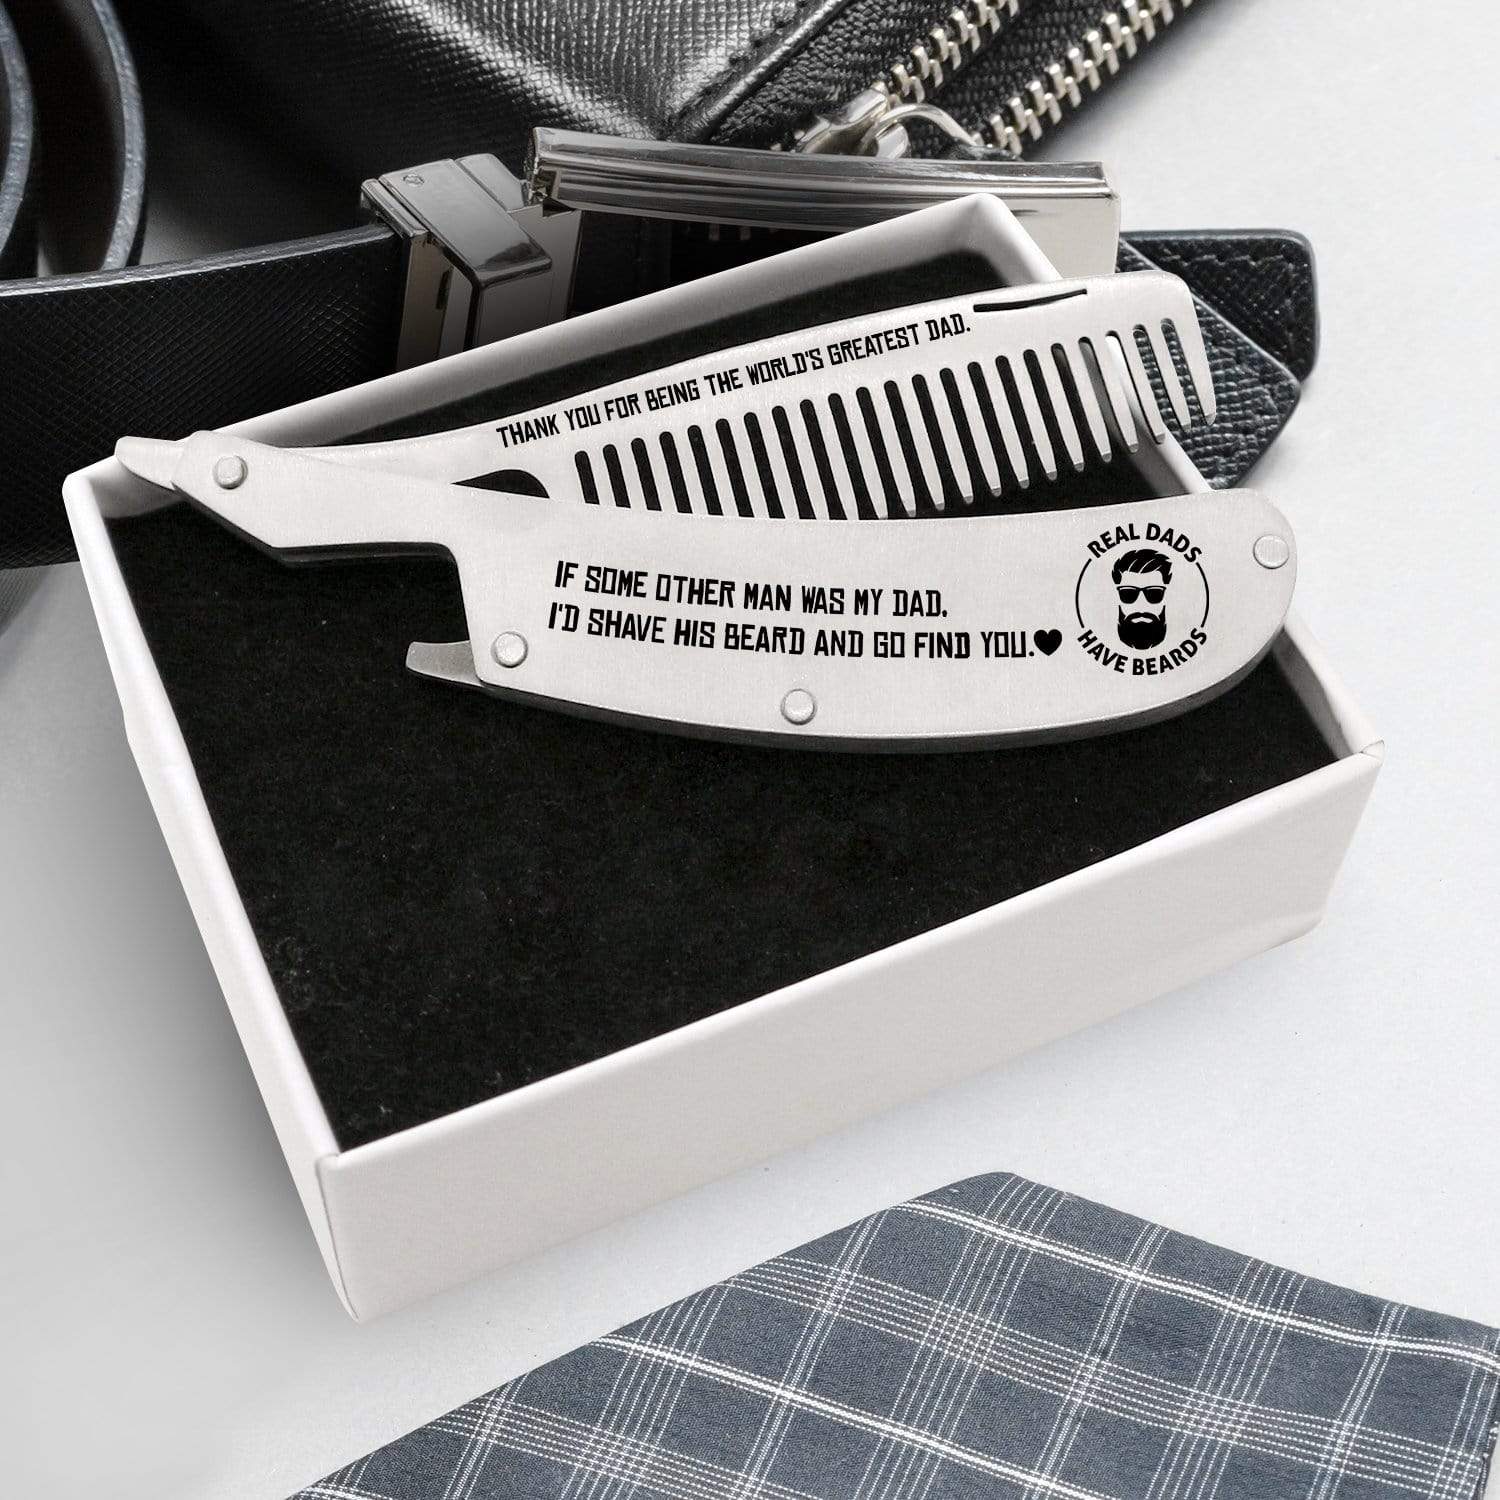 Folding Comb - Beard - To Bearded Dad - Thank You For Being The World's Greatest Dad - Gec18032